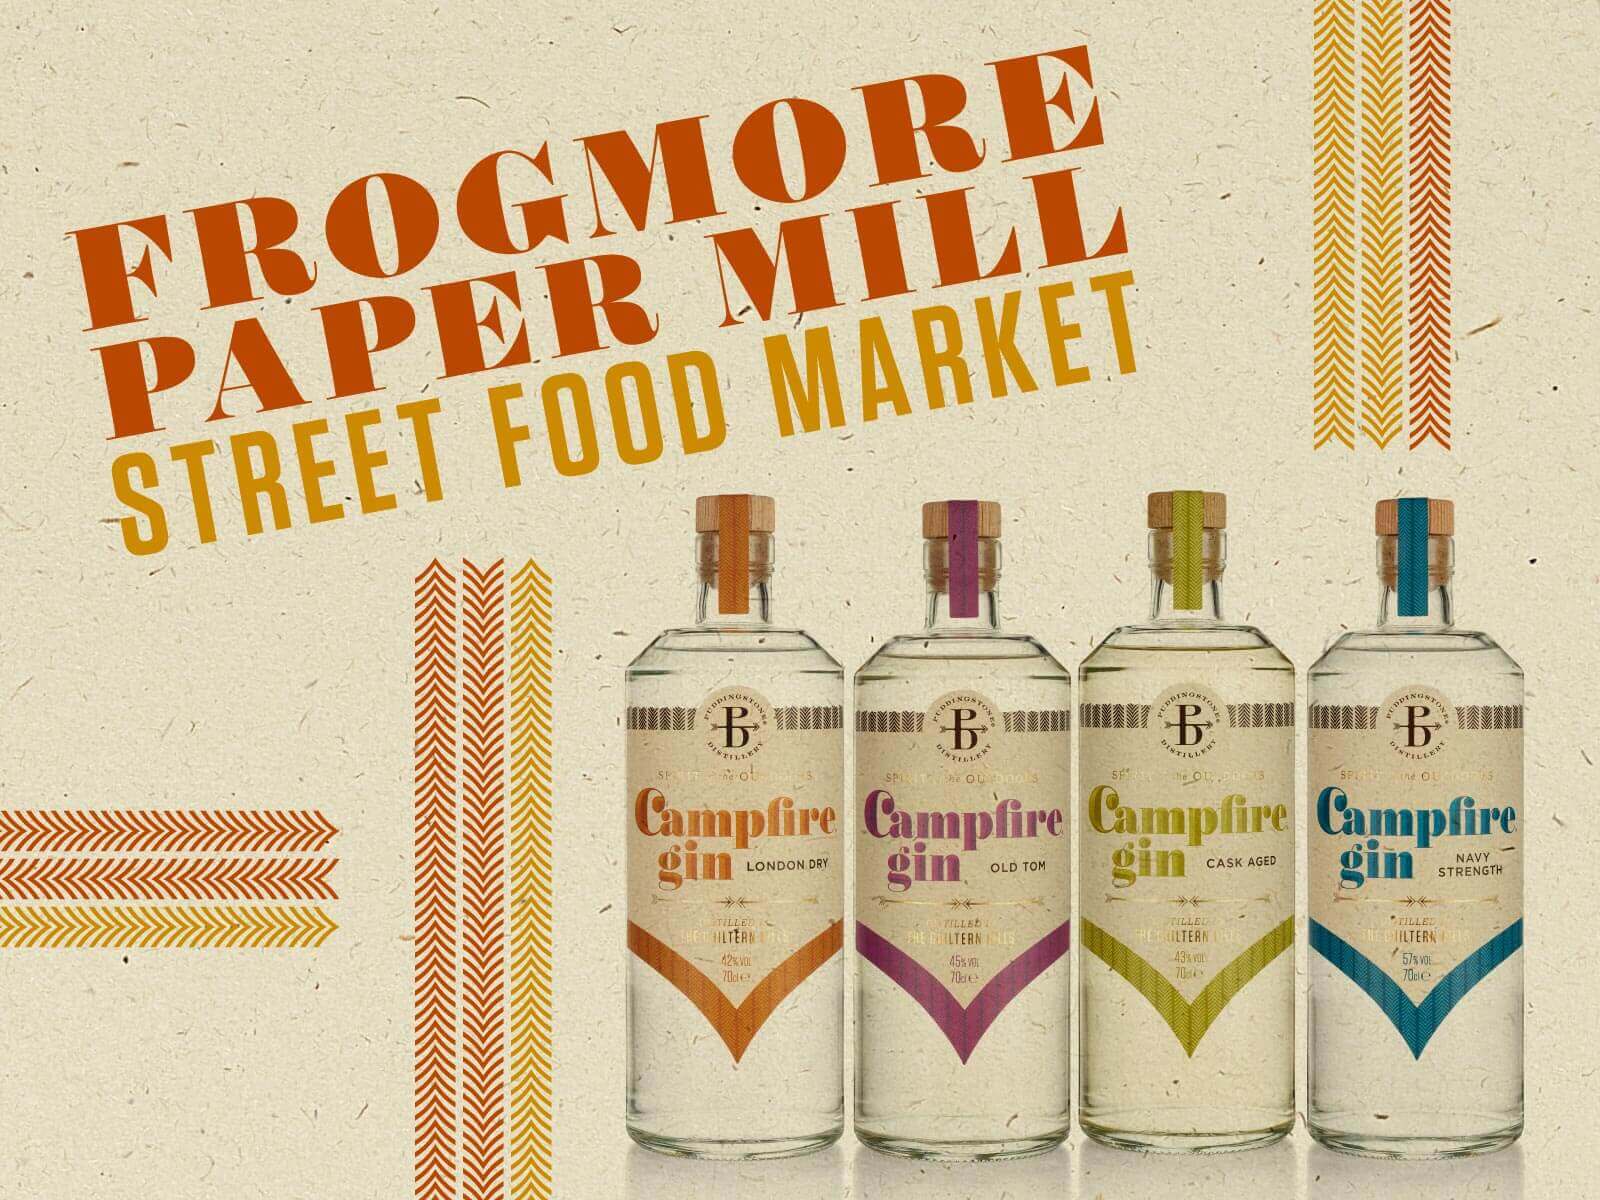 Frogmore Paper Mill Street Food Festival 2022